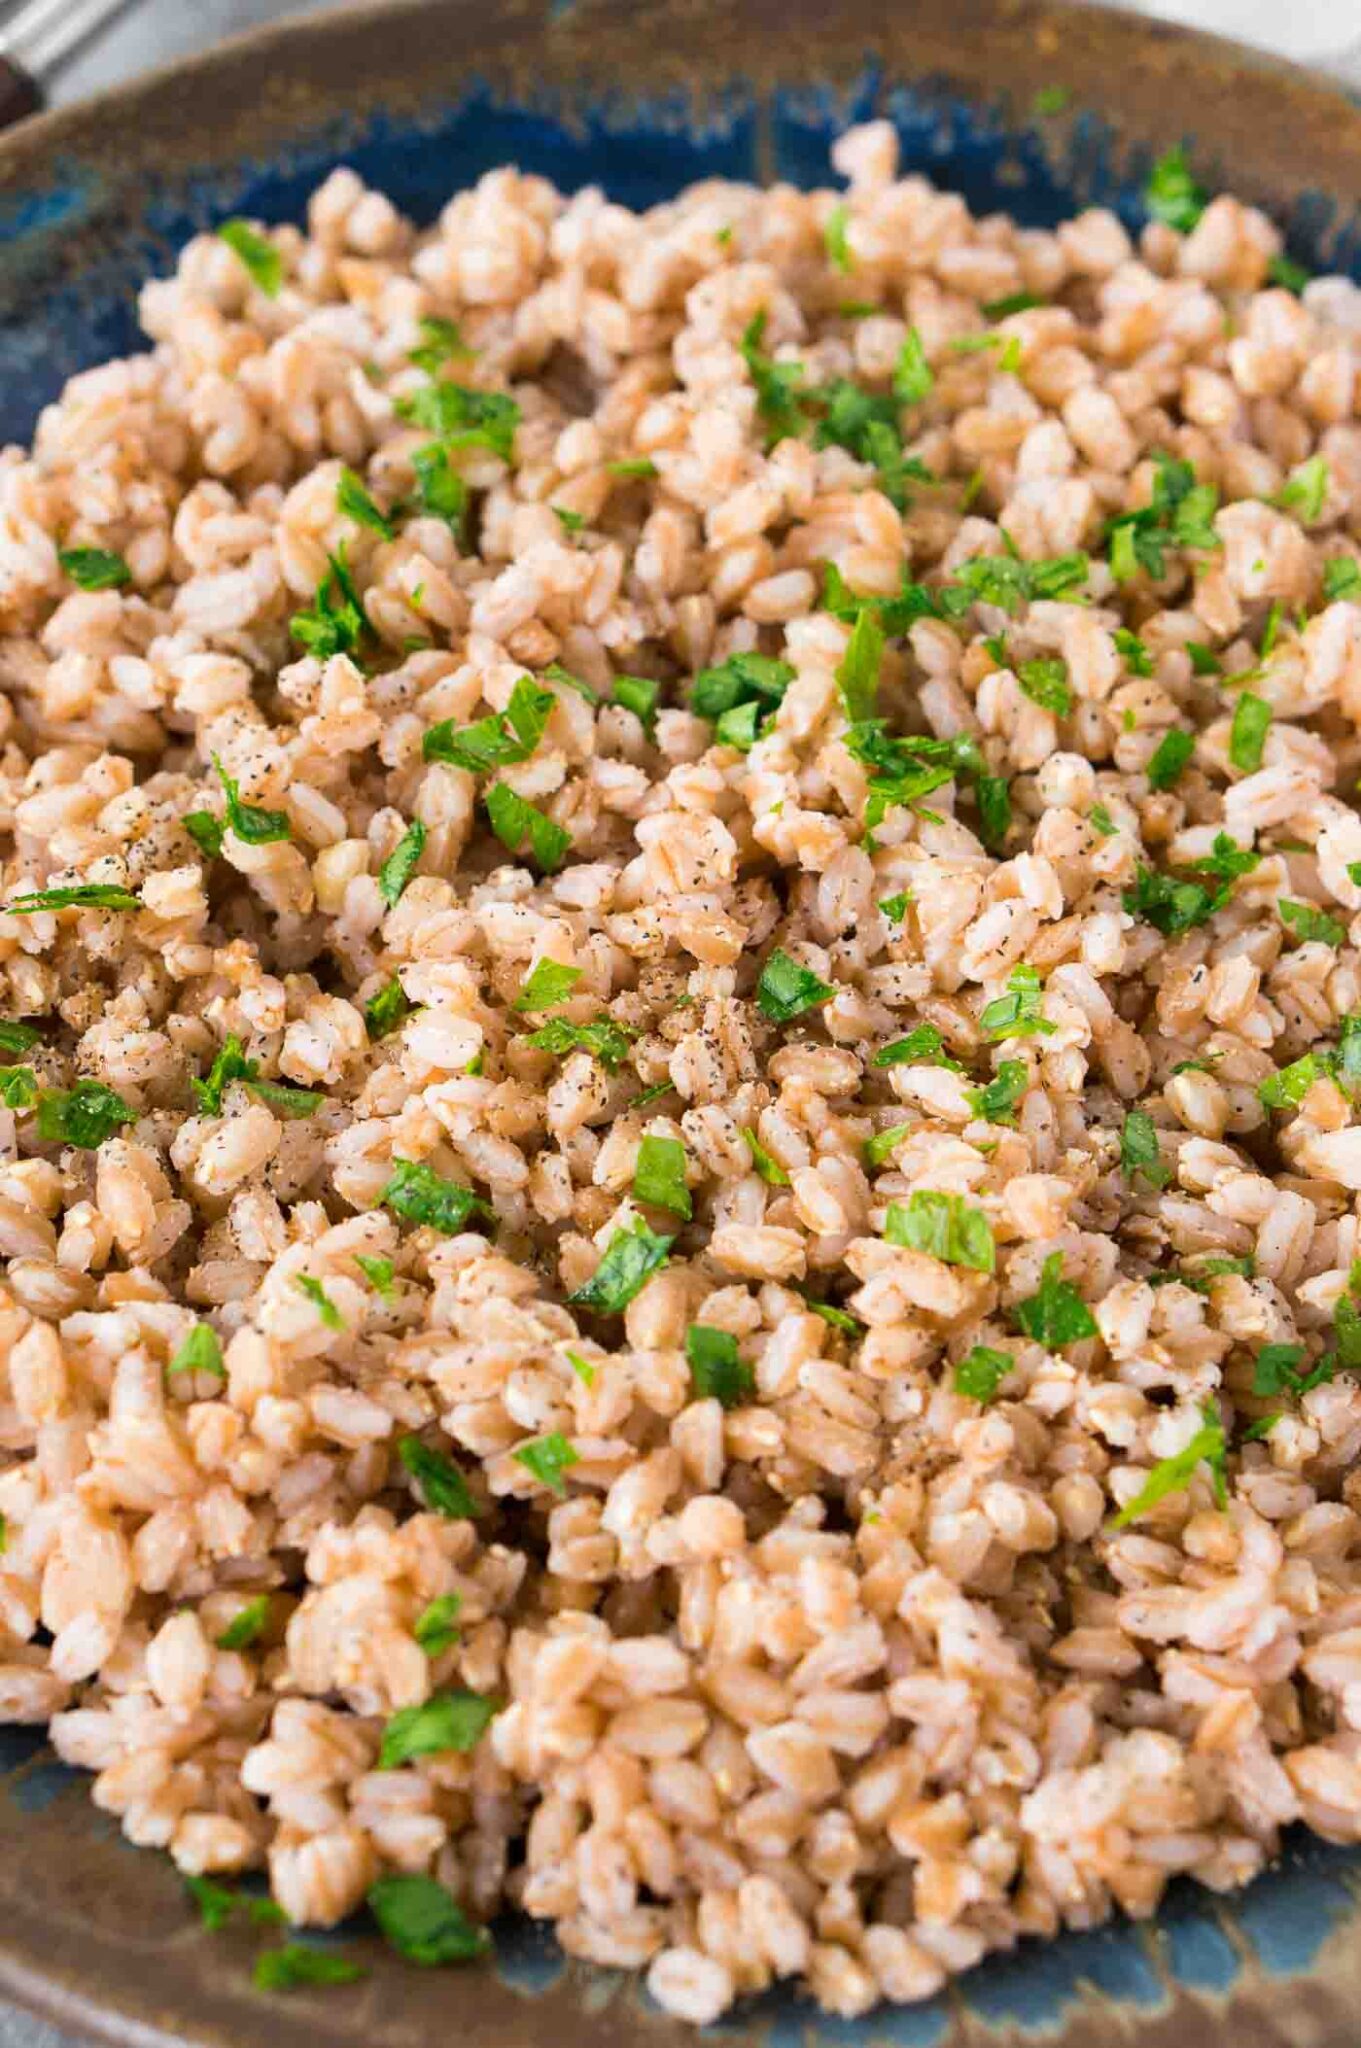 close up image of cooked farro on a plate